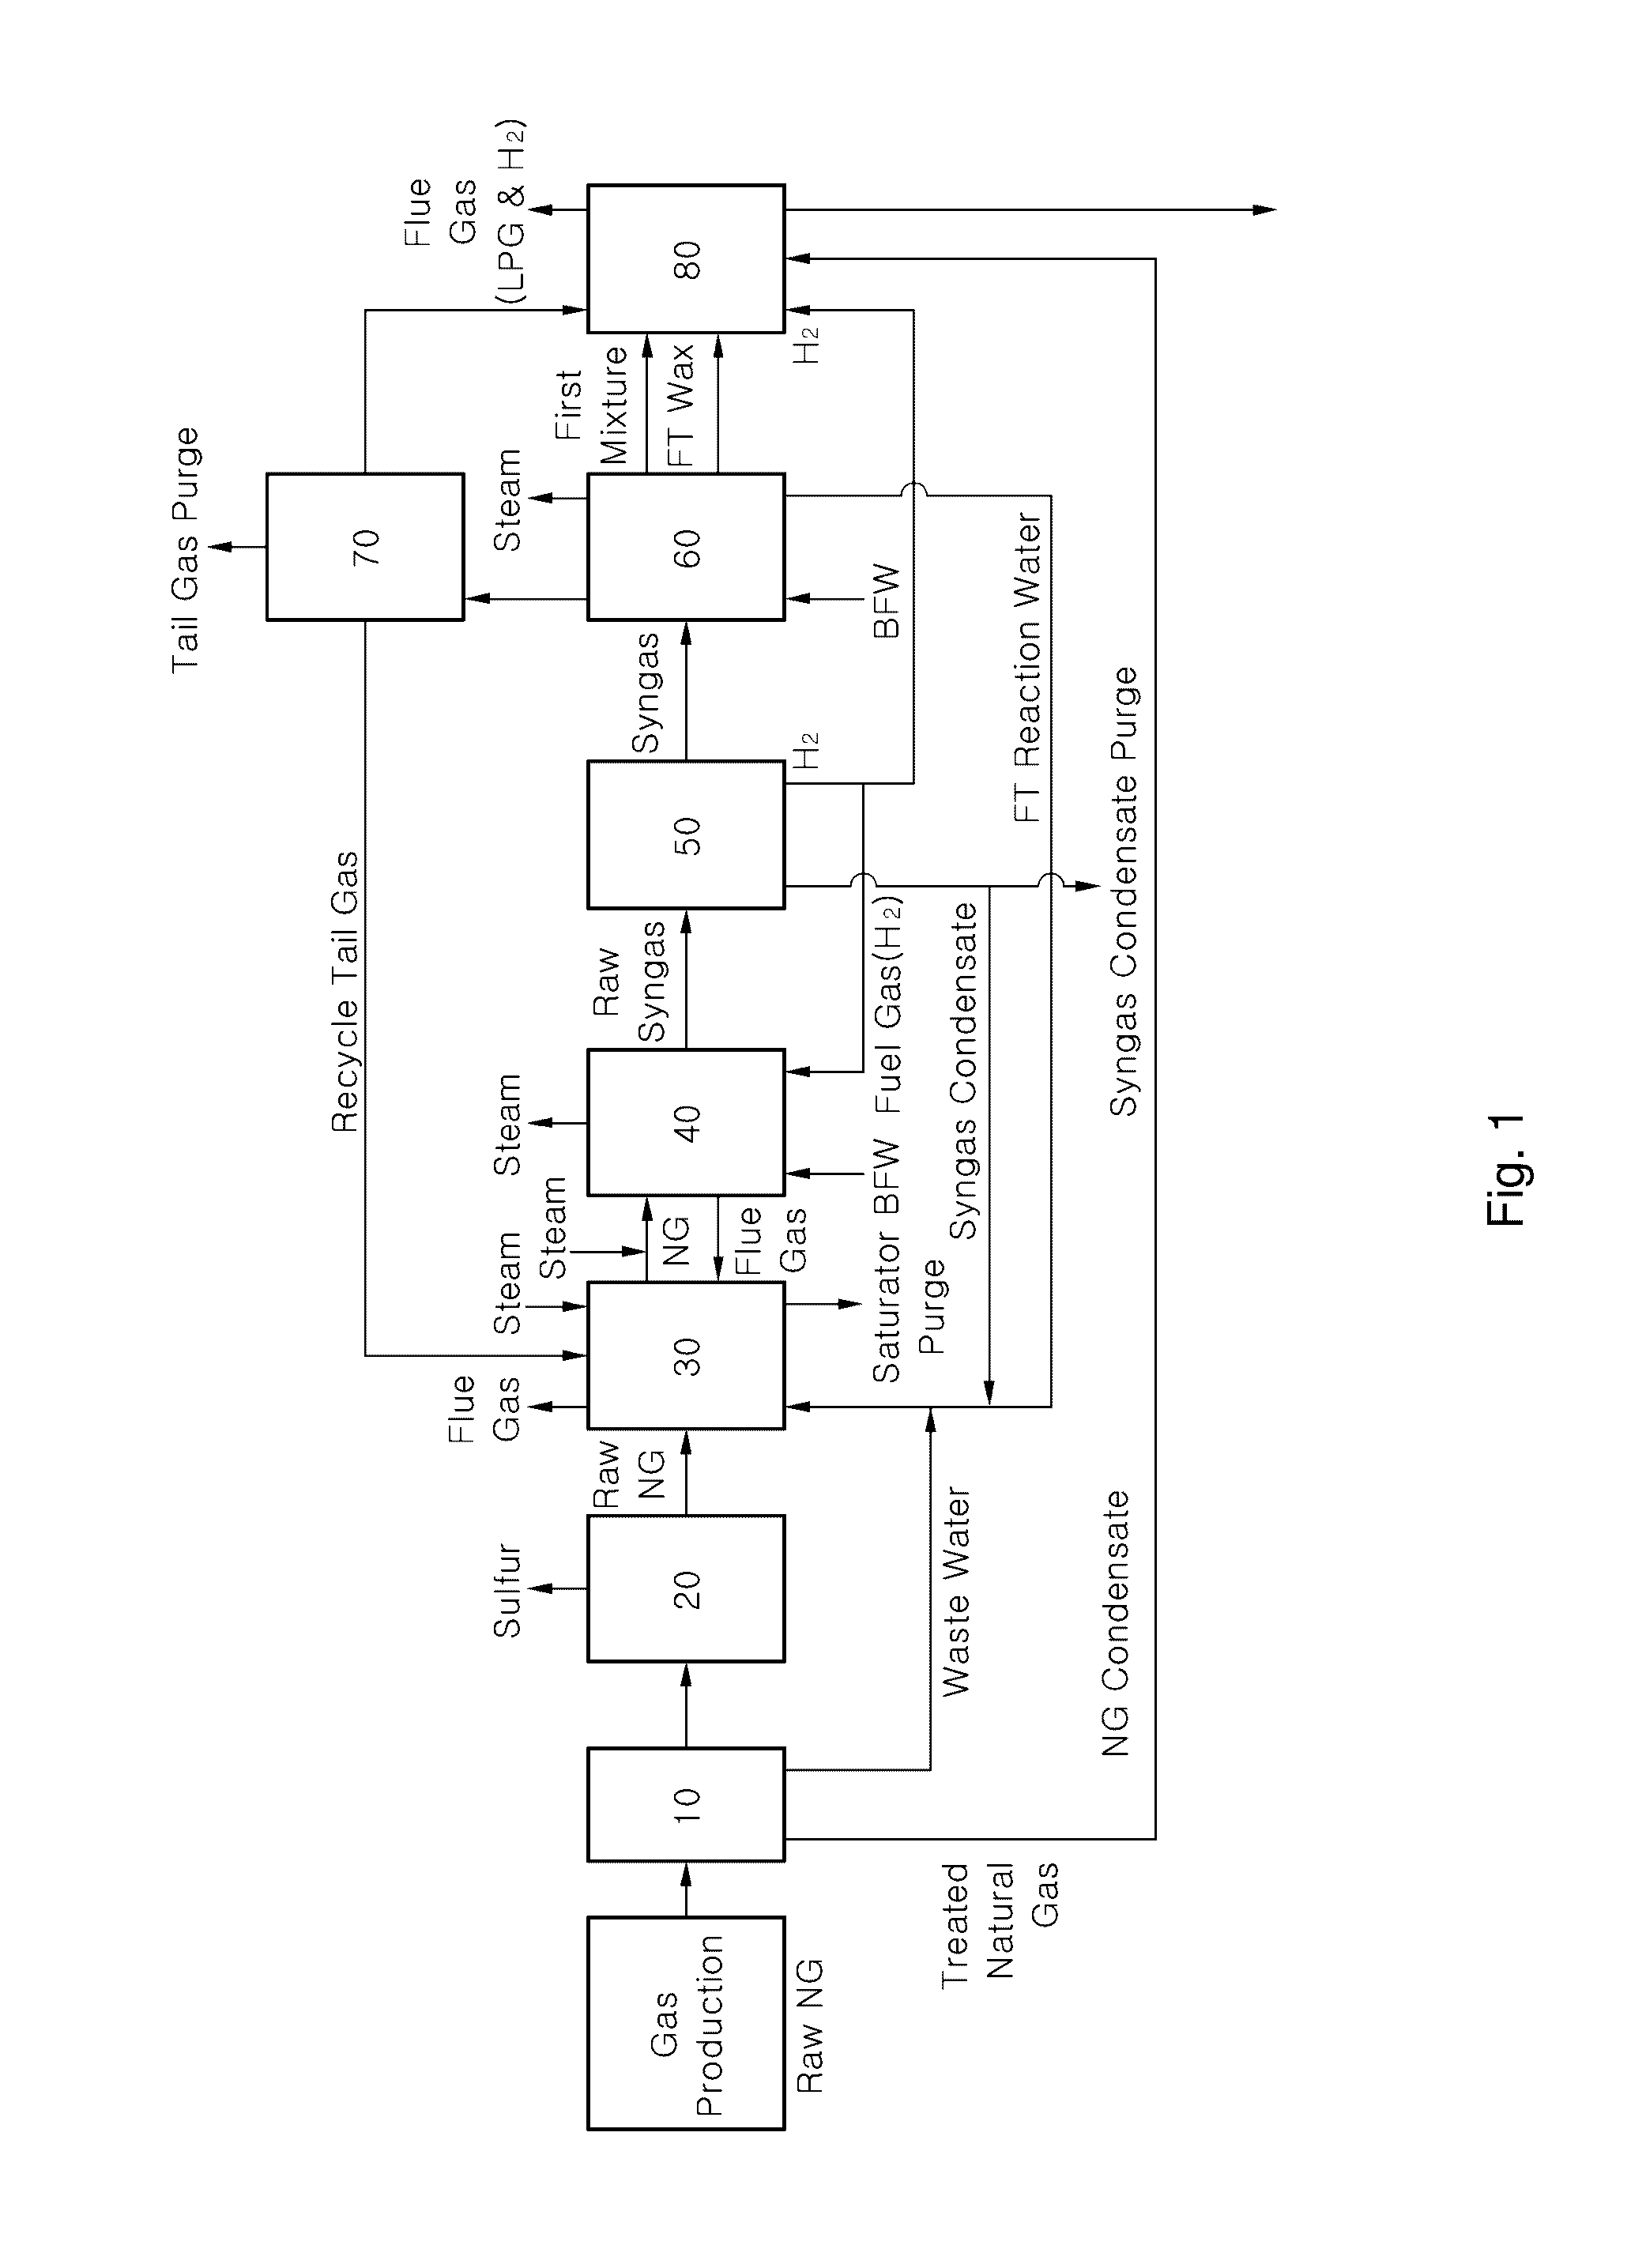 Ft gtl apparatus and method for producing single synthetic crude oil